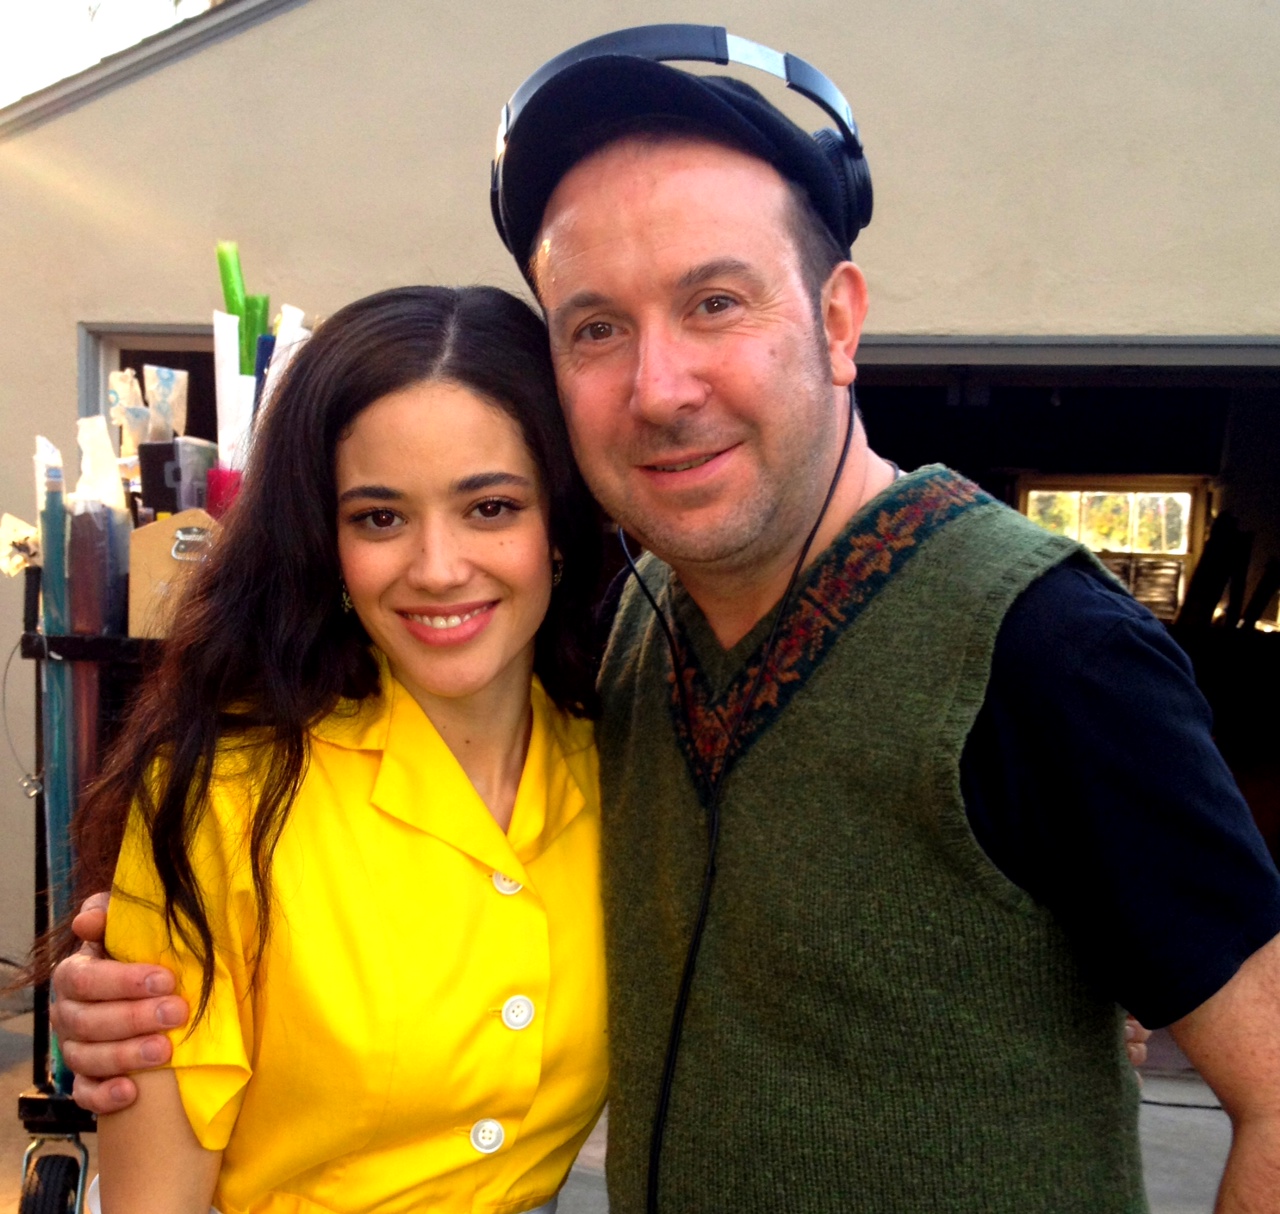 Edy Ganem and Paul McGuigan on the set of Devious Maids